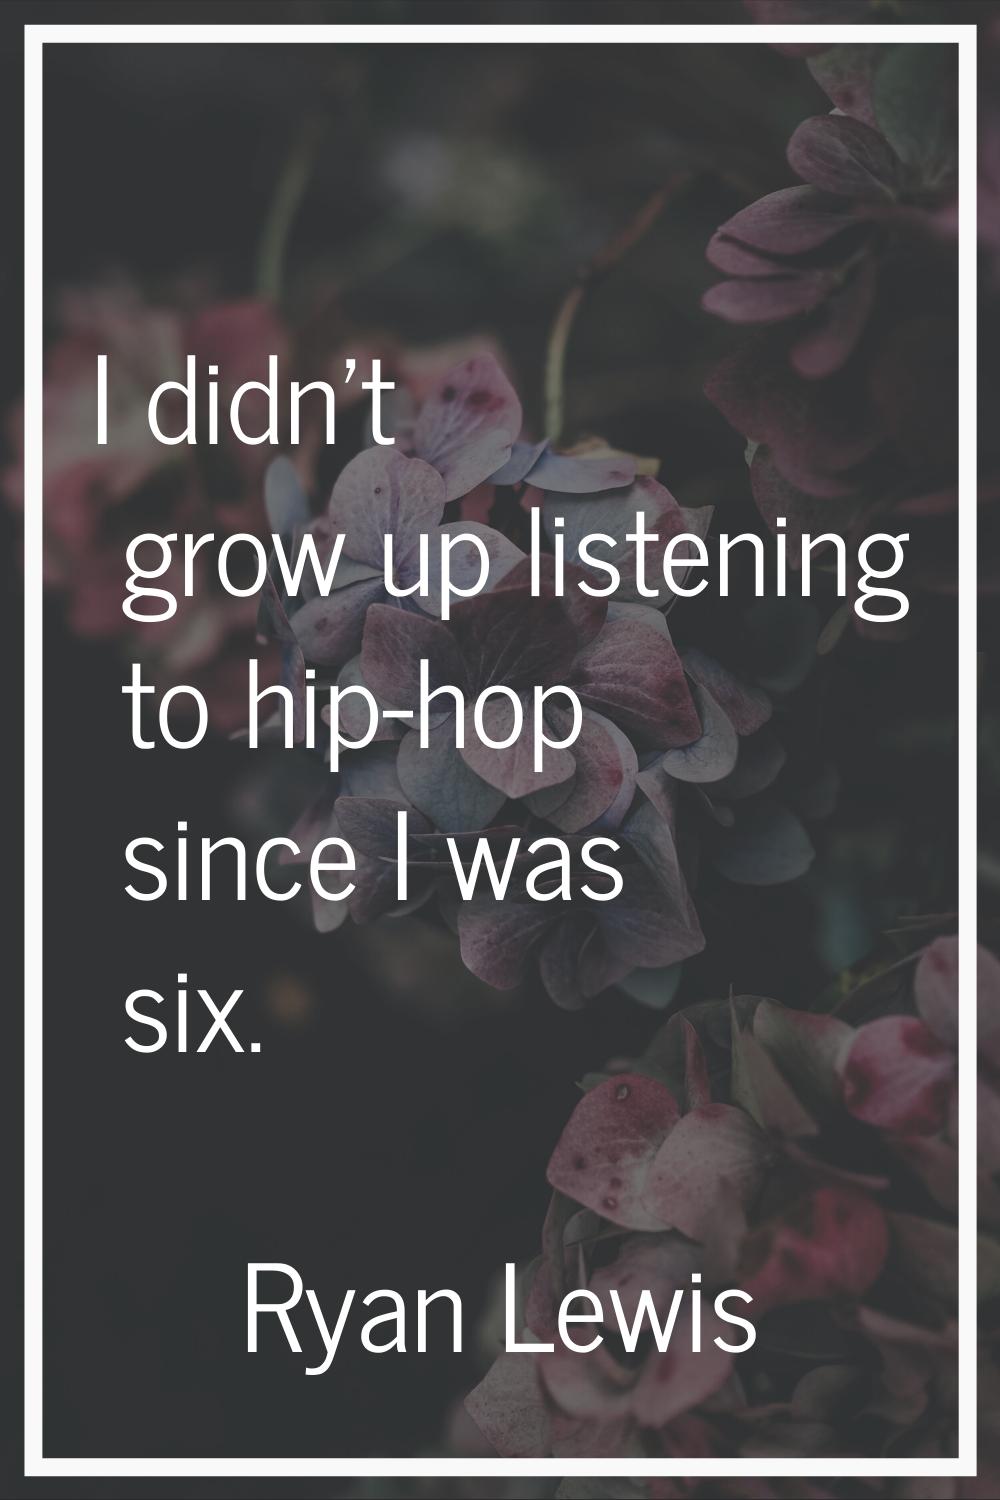 I didn't grow up listening to hip-hop since I was six.